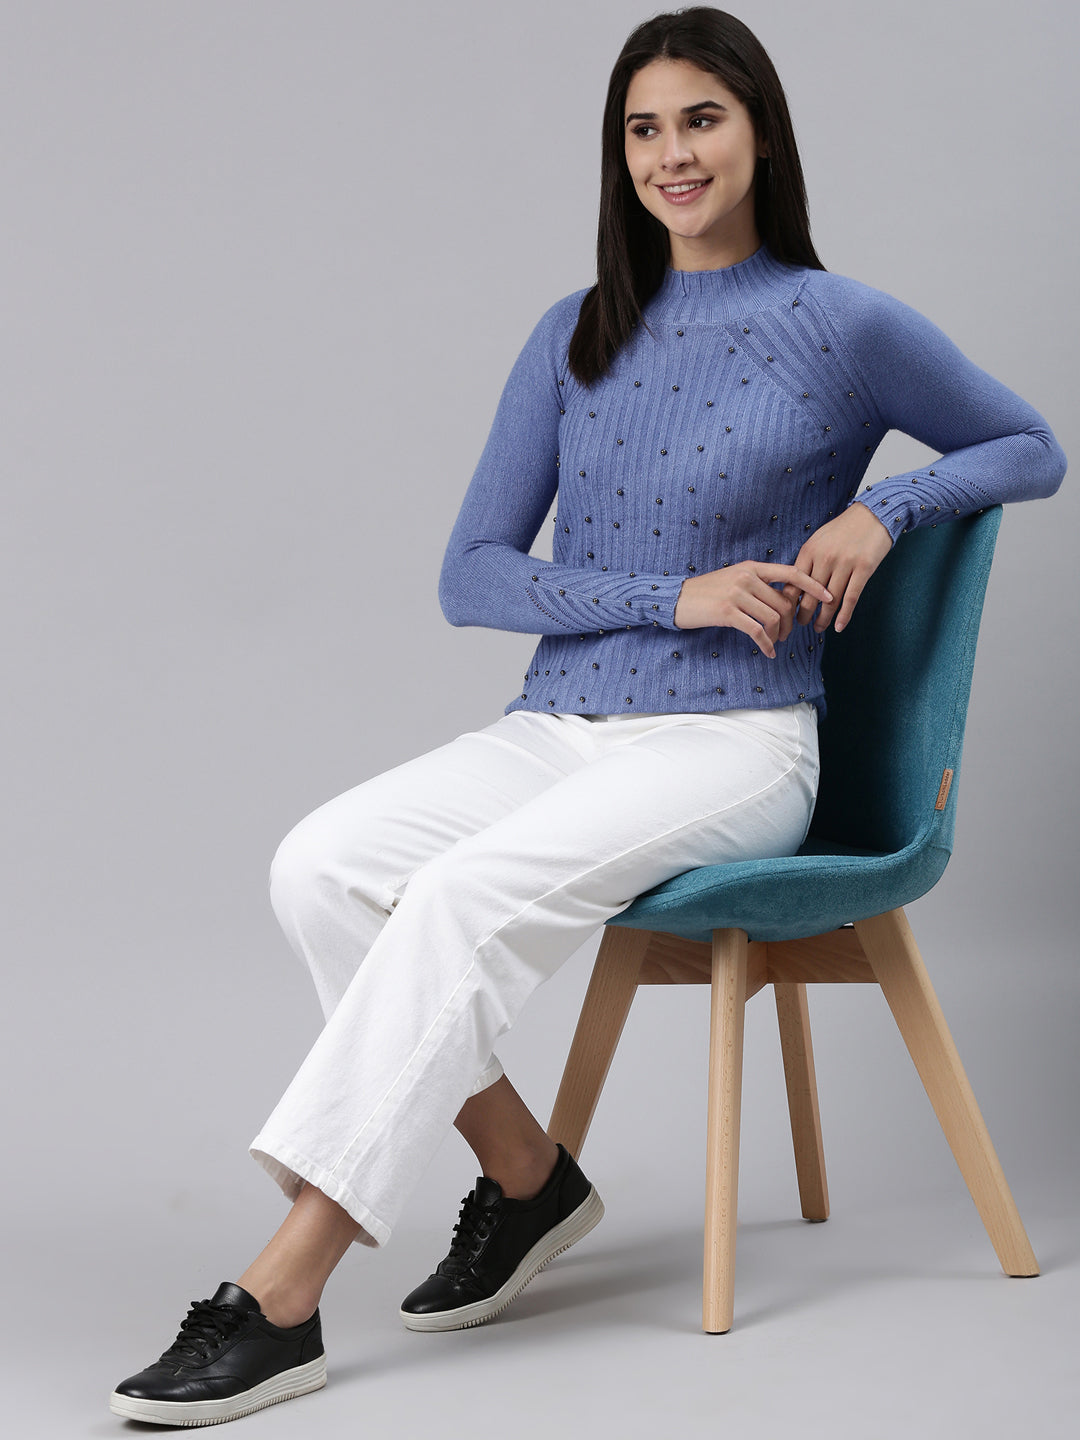 High Neck Solid Raglan Sleeves Fitted Blue Top